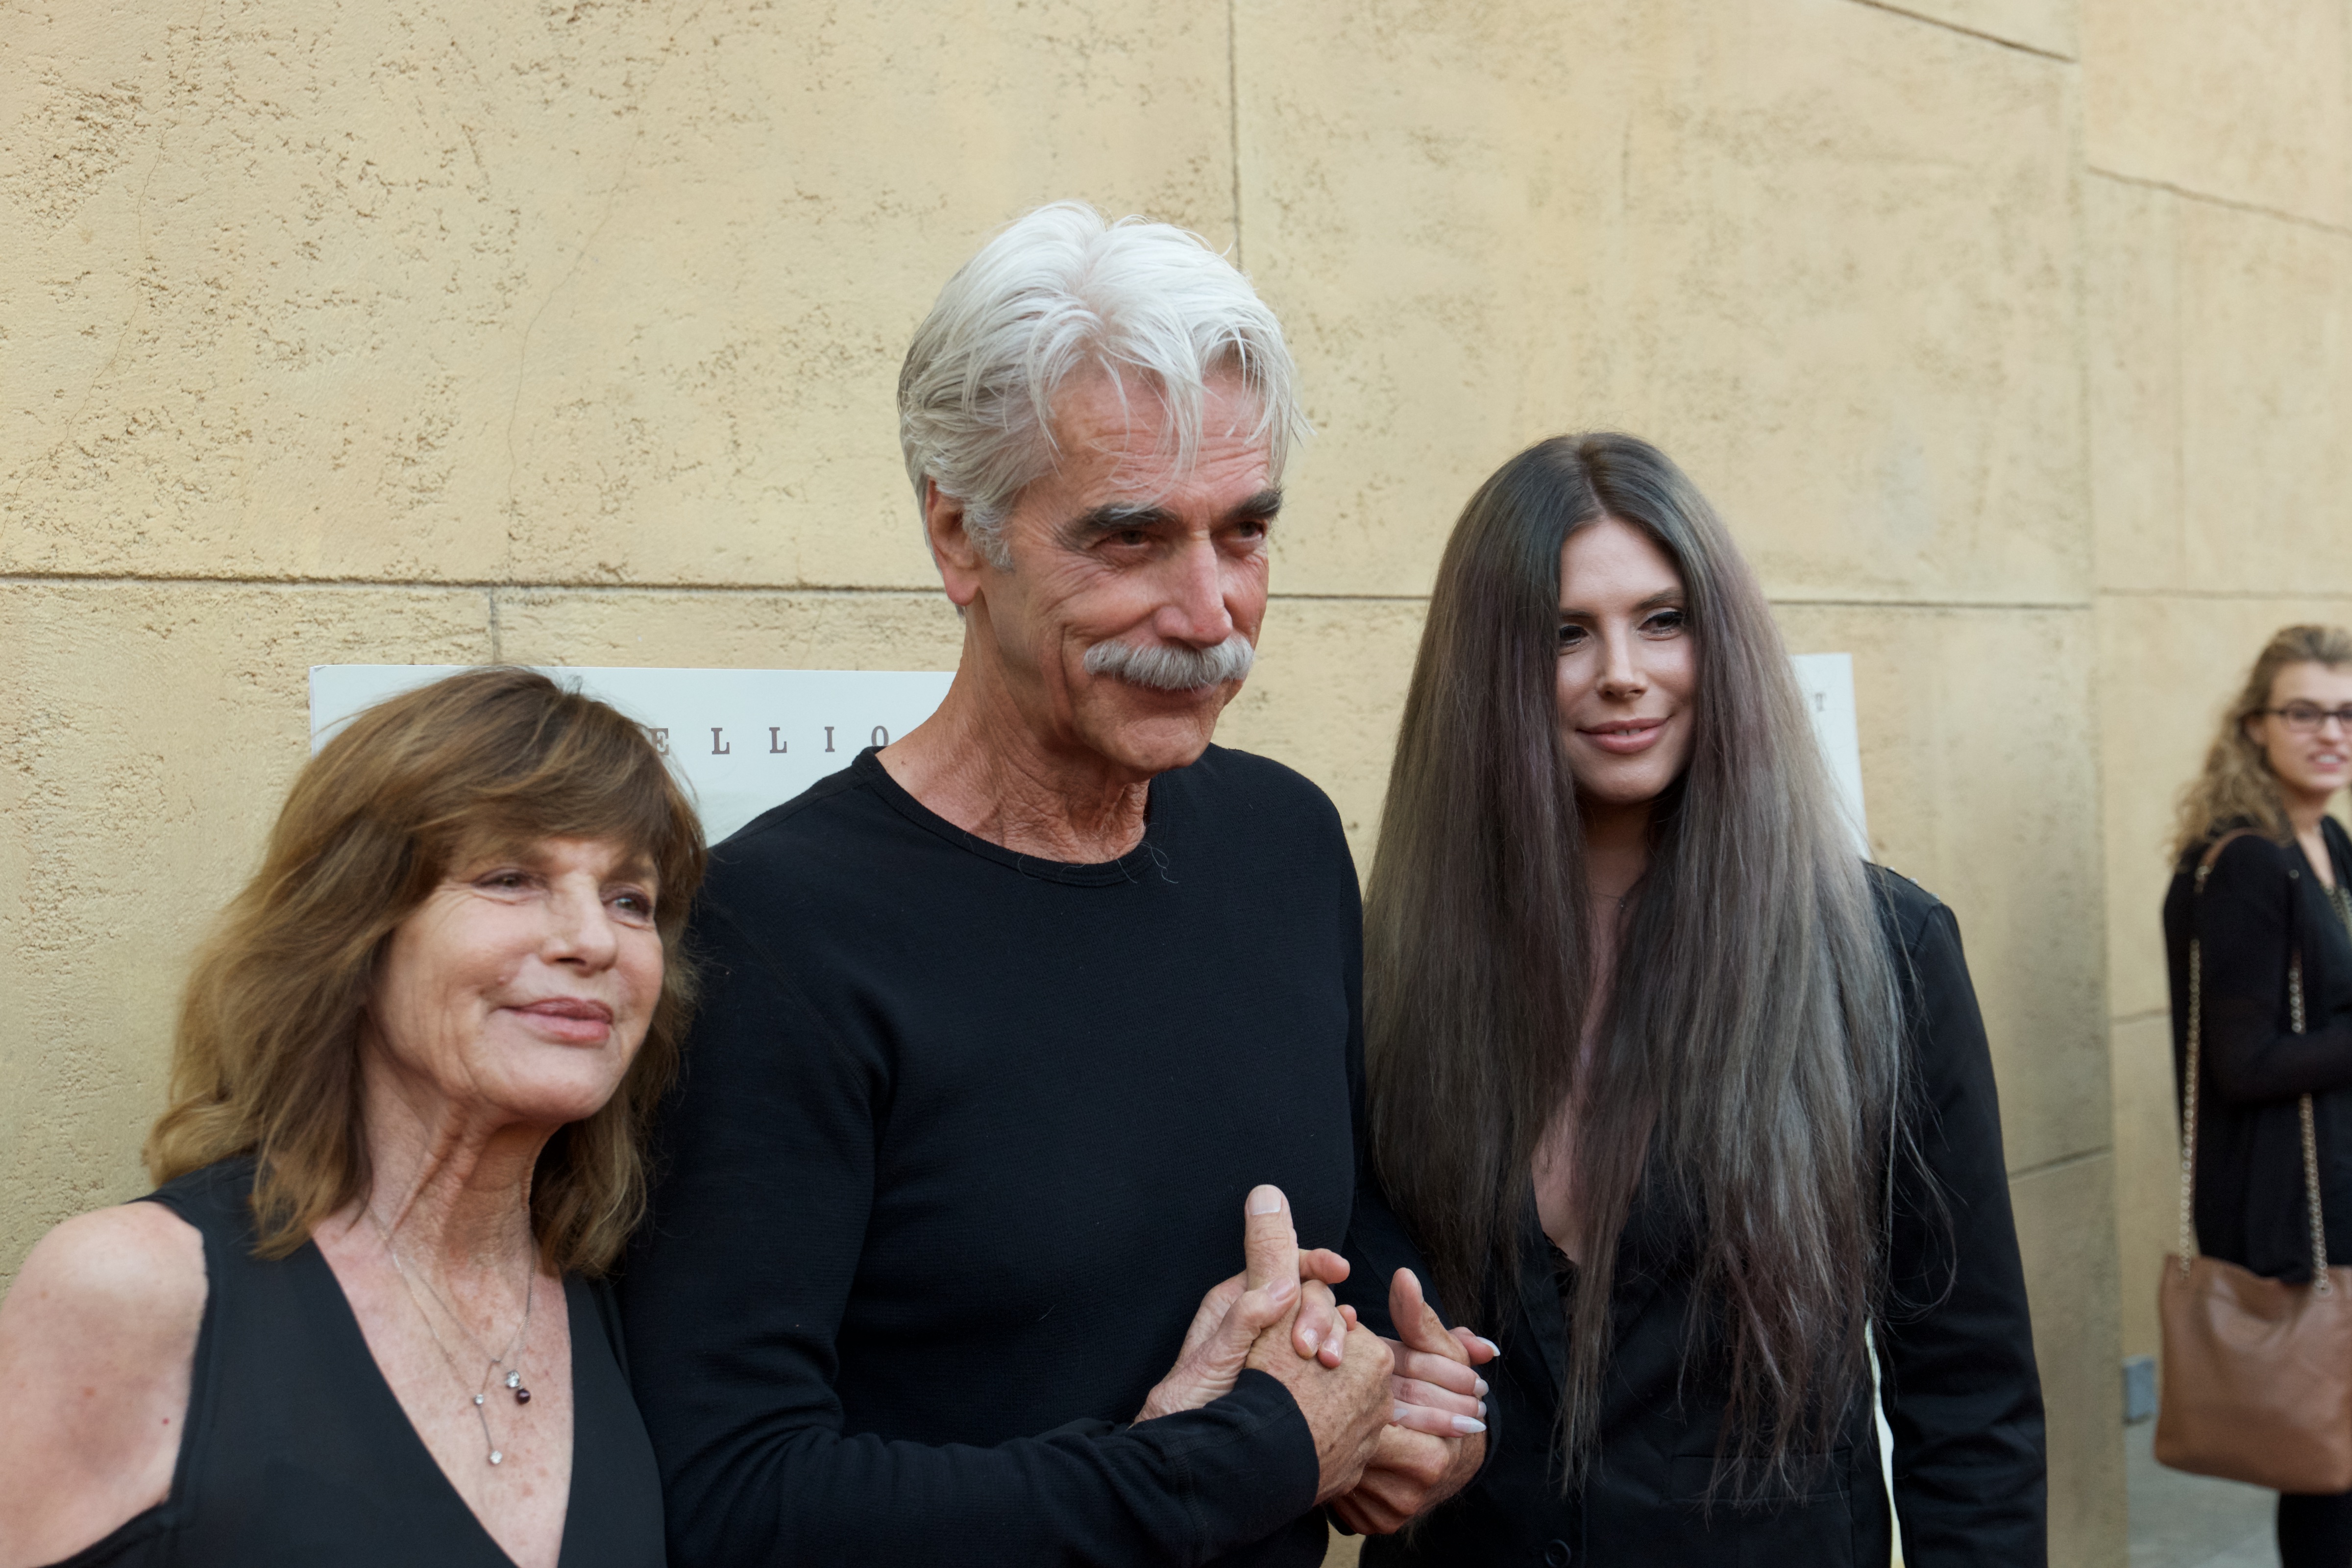 Sam Elliott, his wife Katherine Ross and their daughter Cleo the Premiere Of The Orchard's "The Hero" in California in 2017 | Source: Getty Images